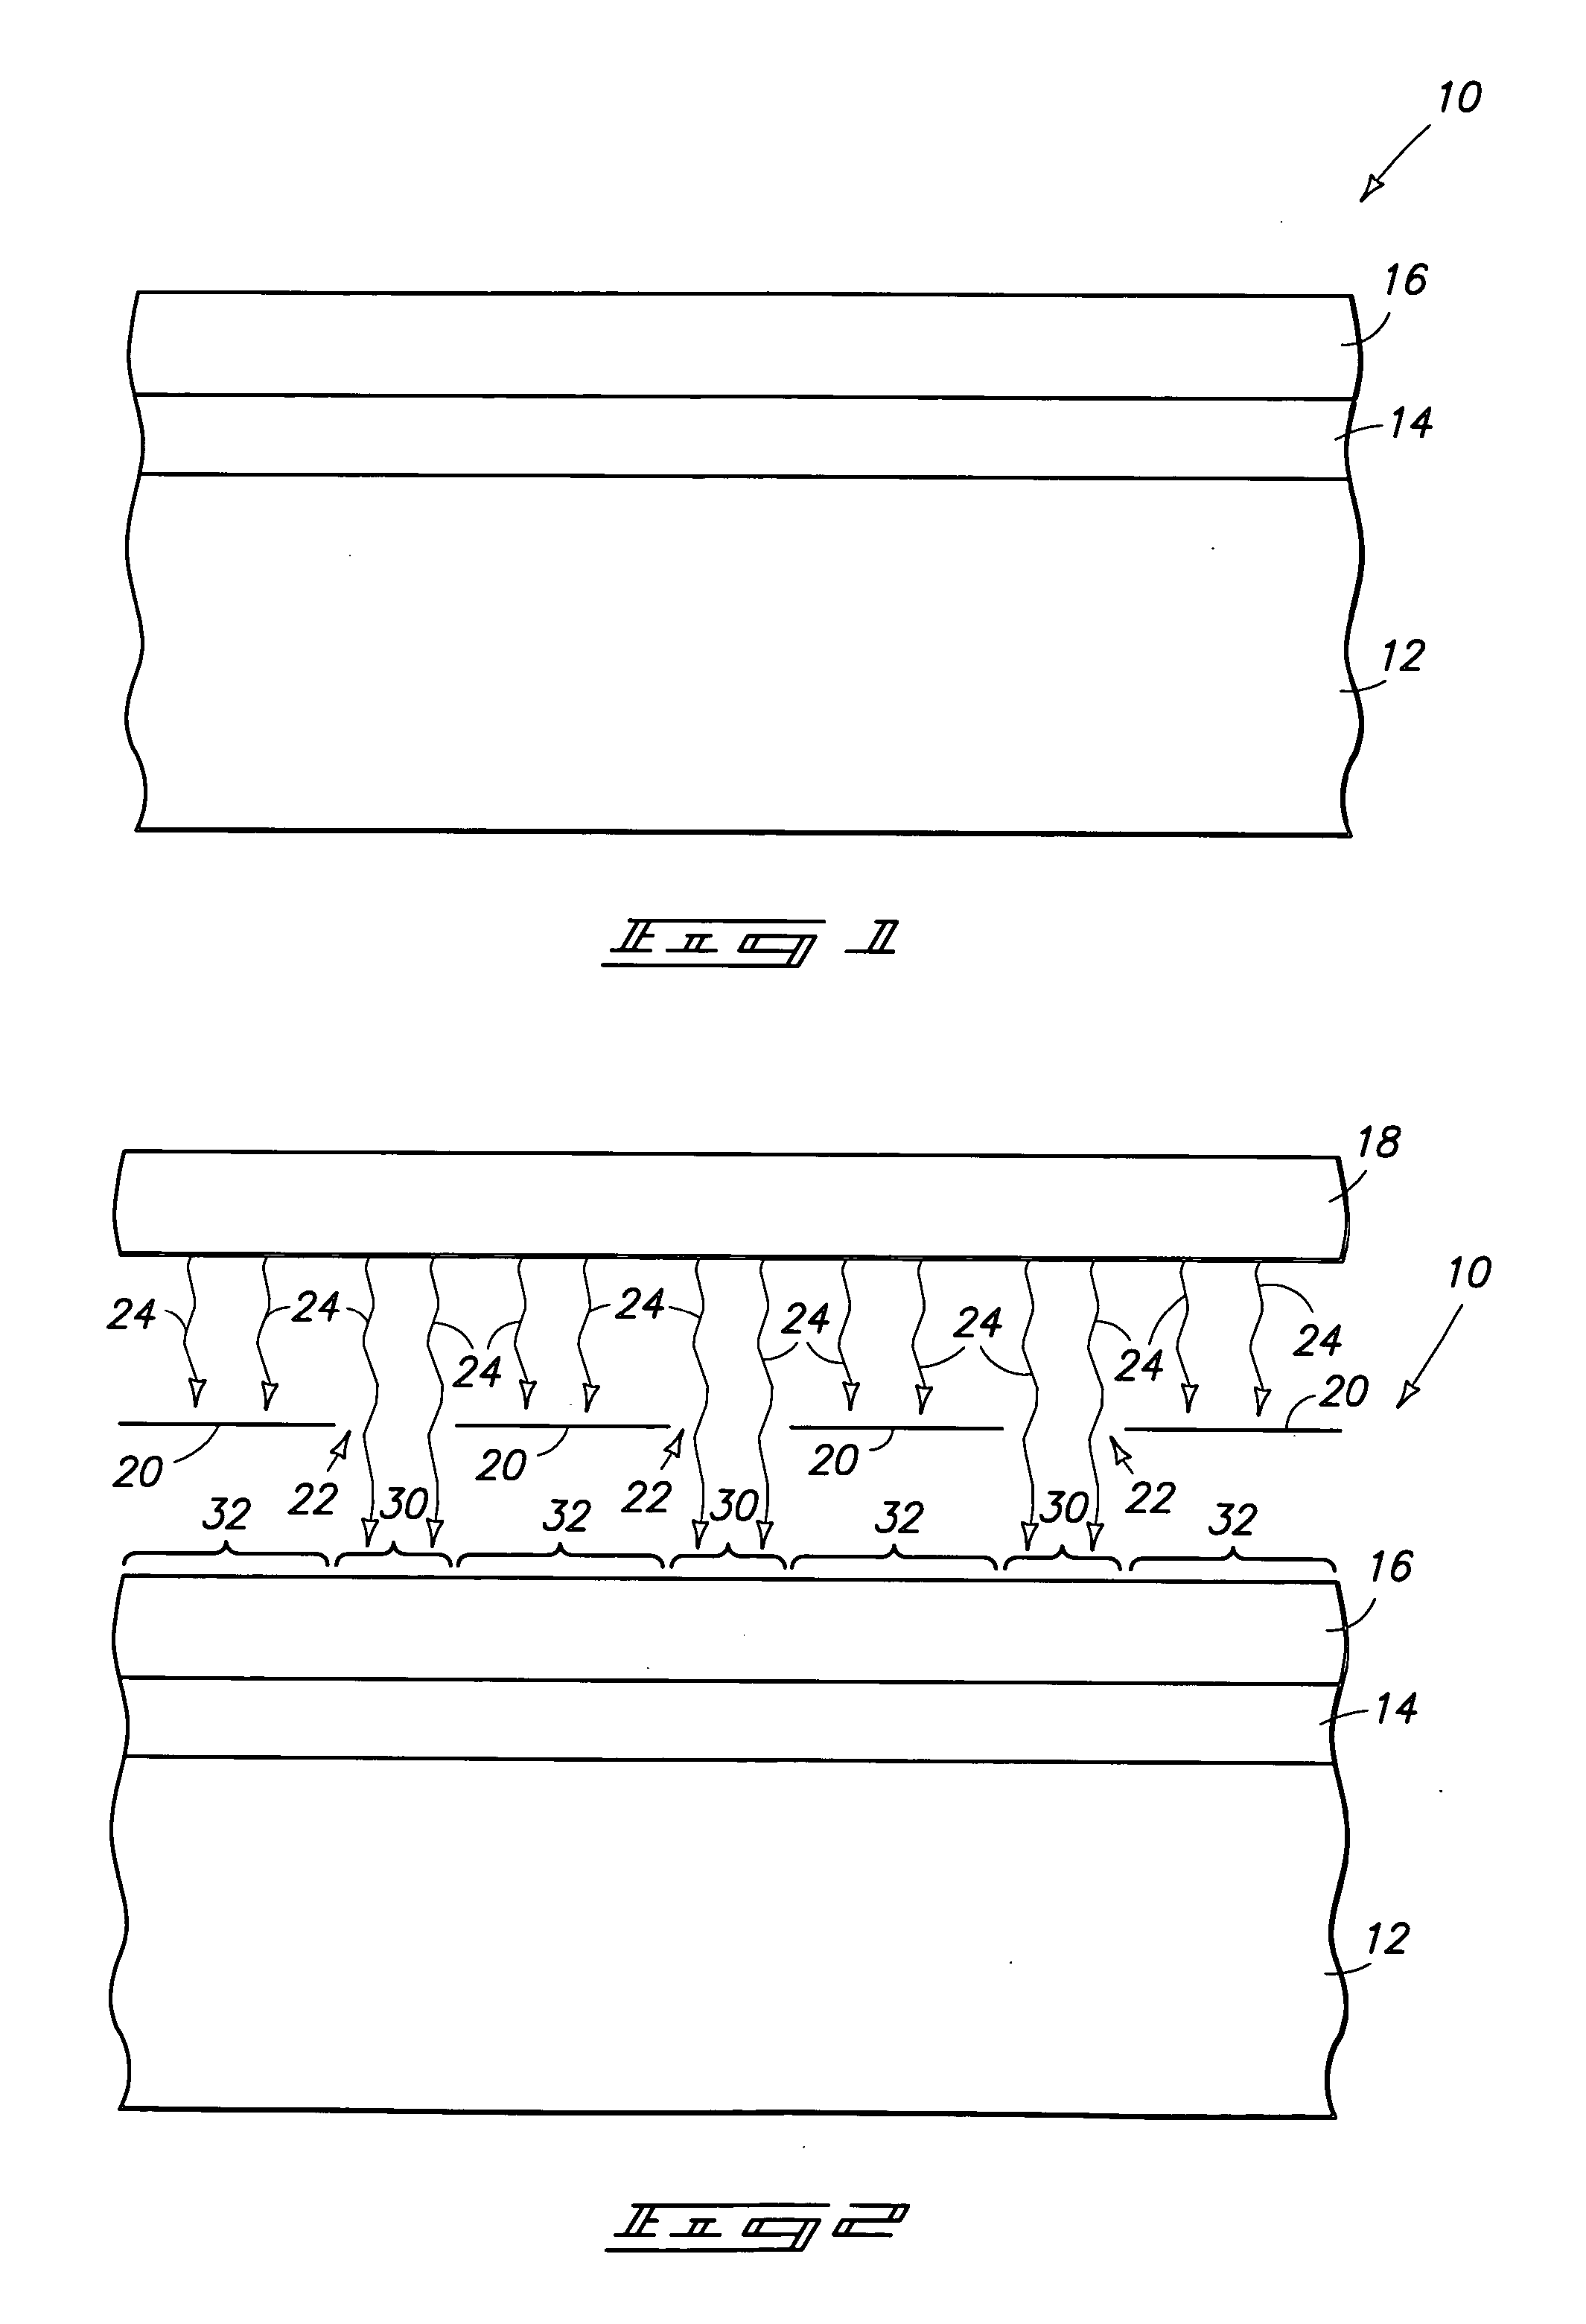 Semiconductor processing methods